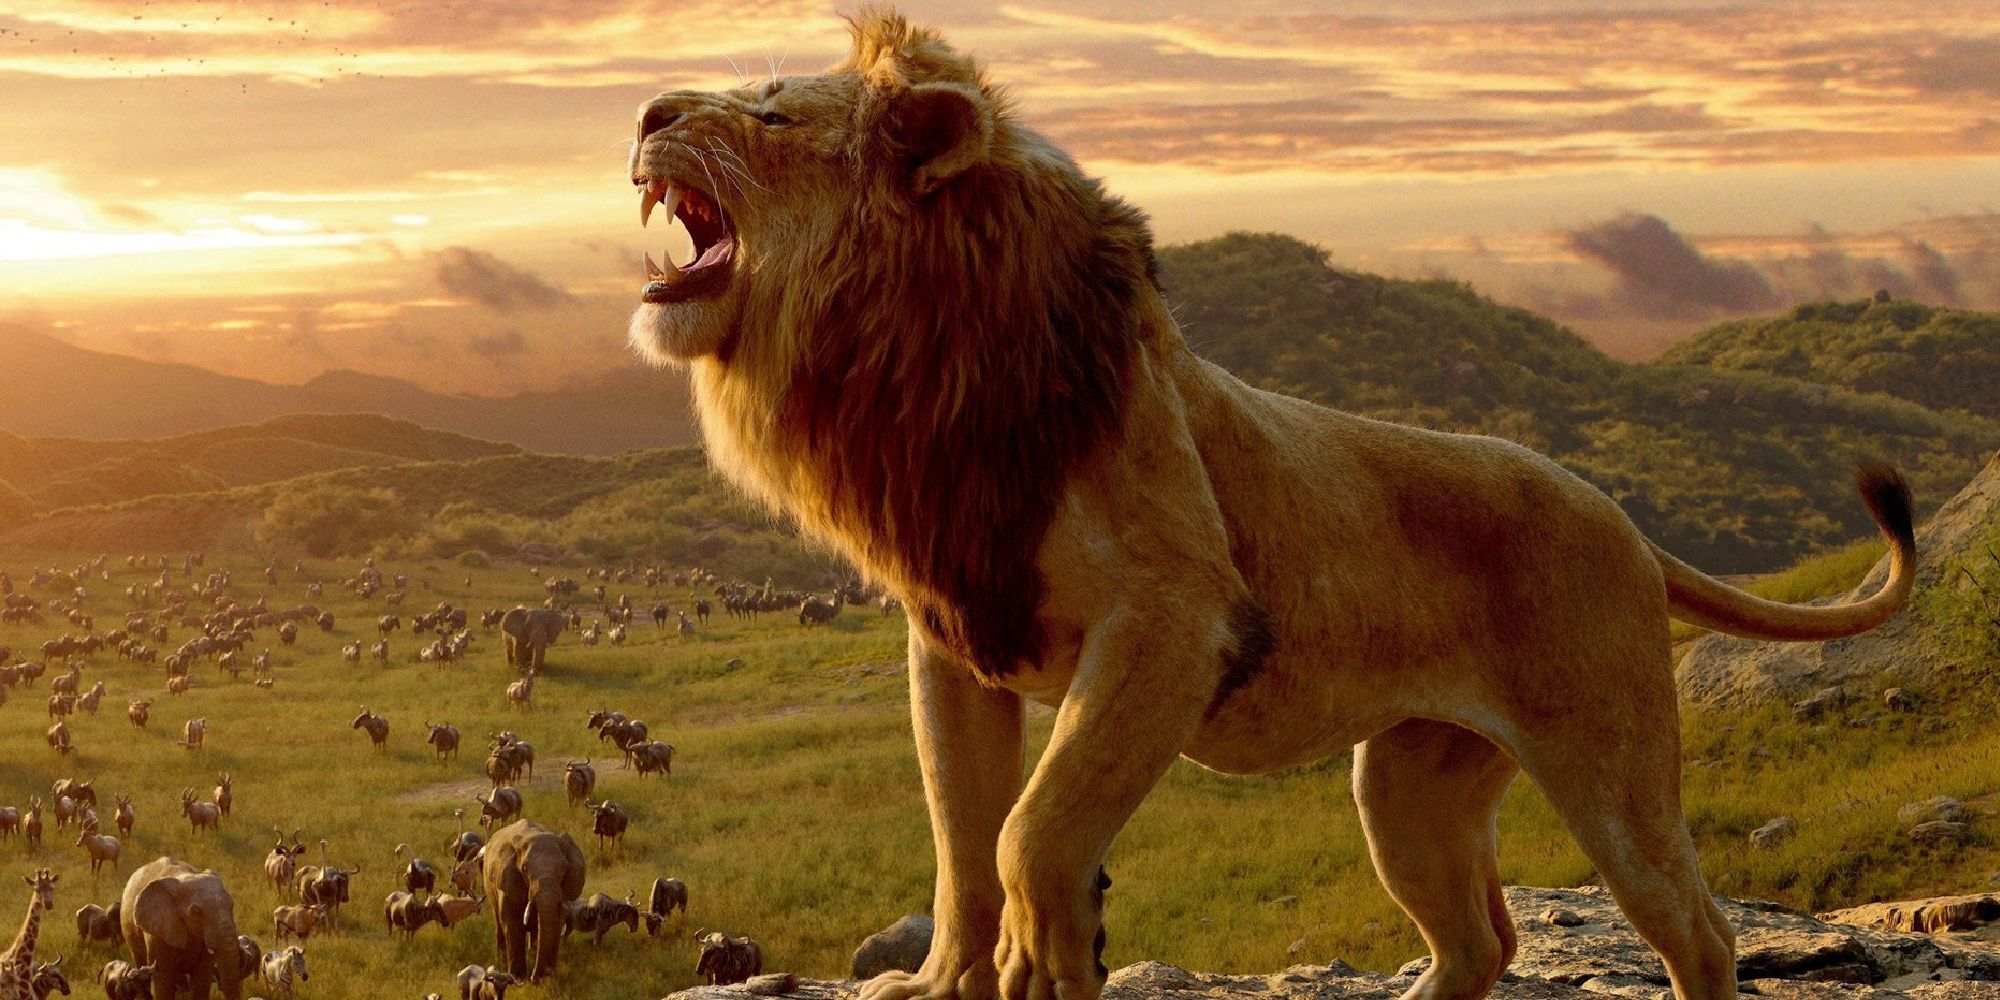 Disney Wants to Expand 'The Lion King' Into a 'Star Wars'-Like Franchise